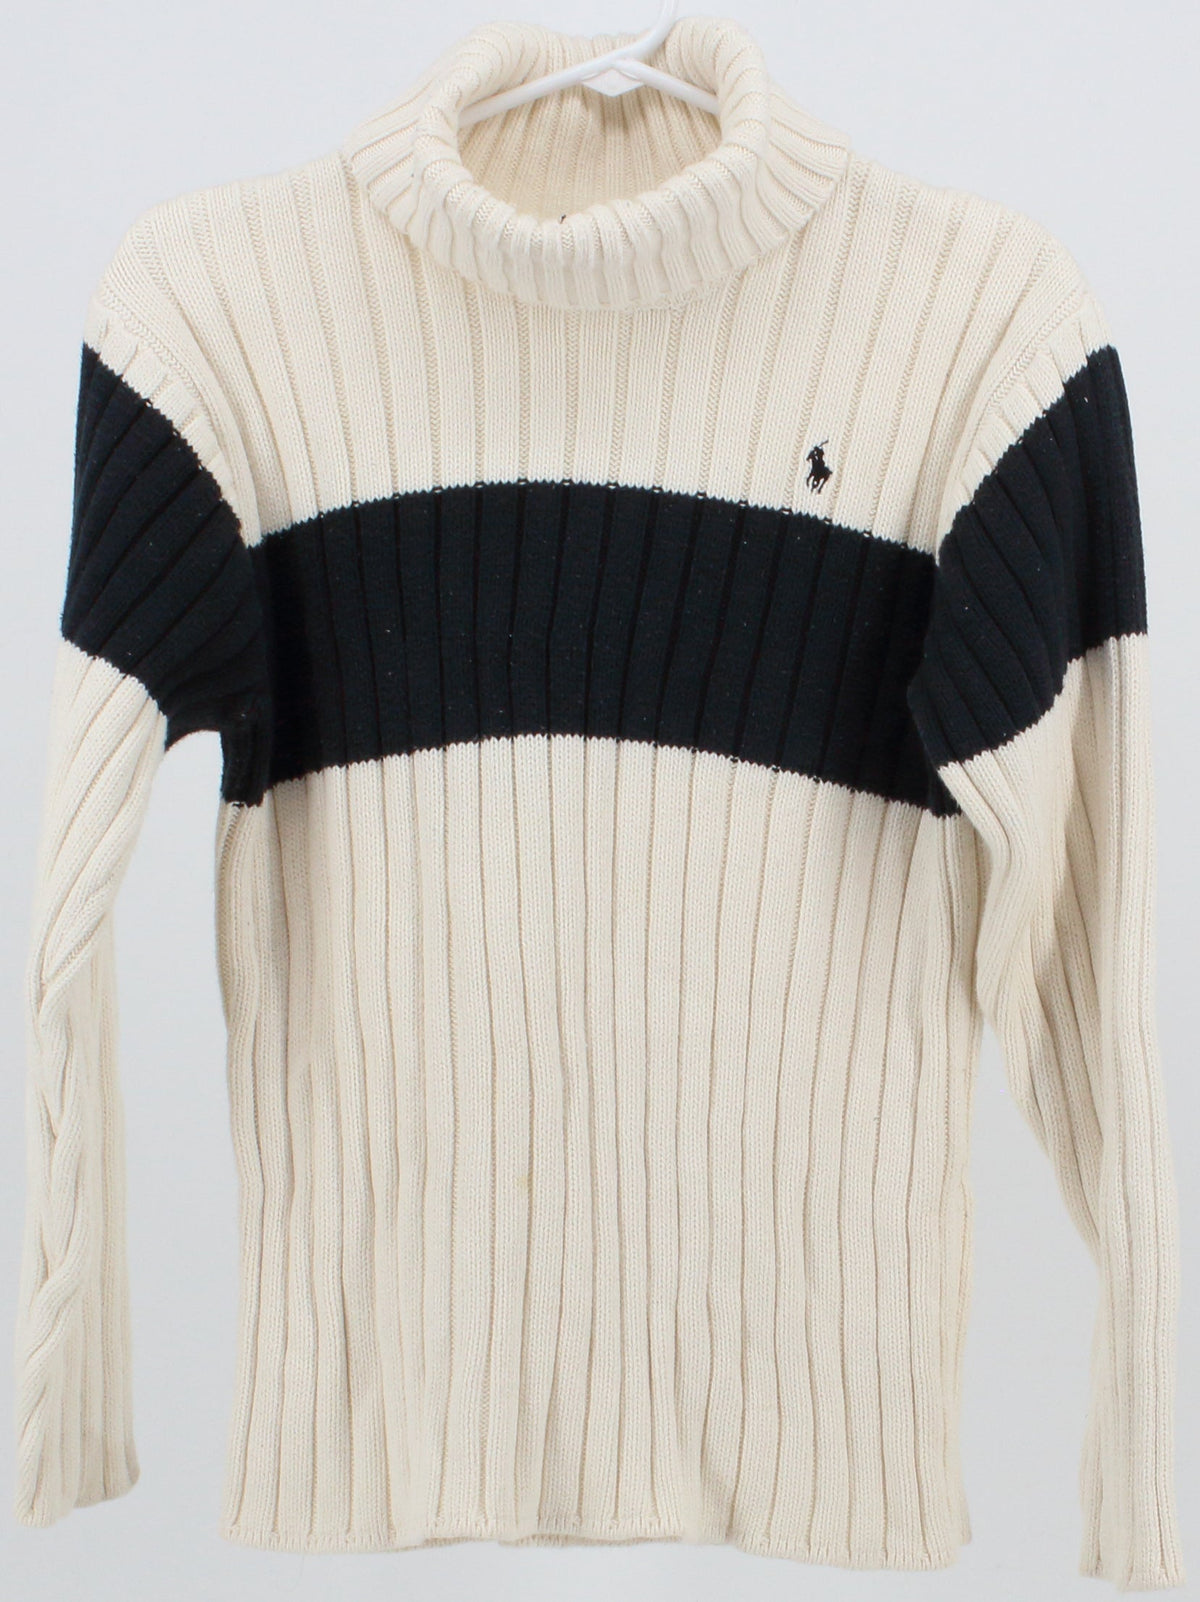 Polo by Ralph Lauren Turtleneck Cream and Black Sweater